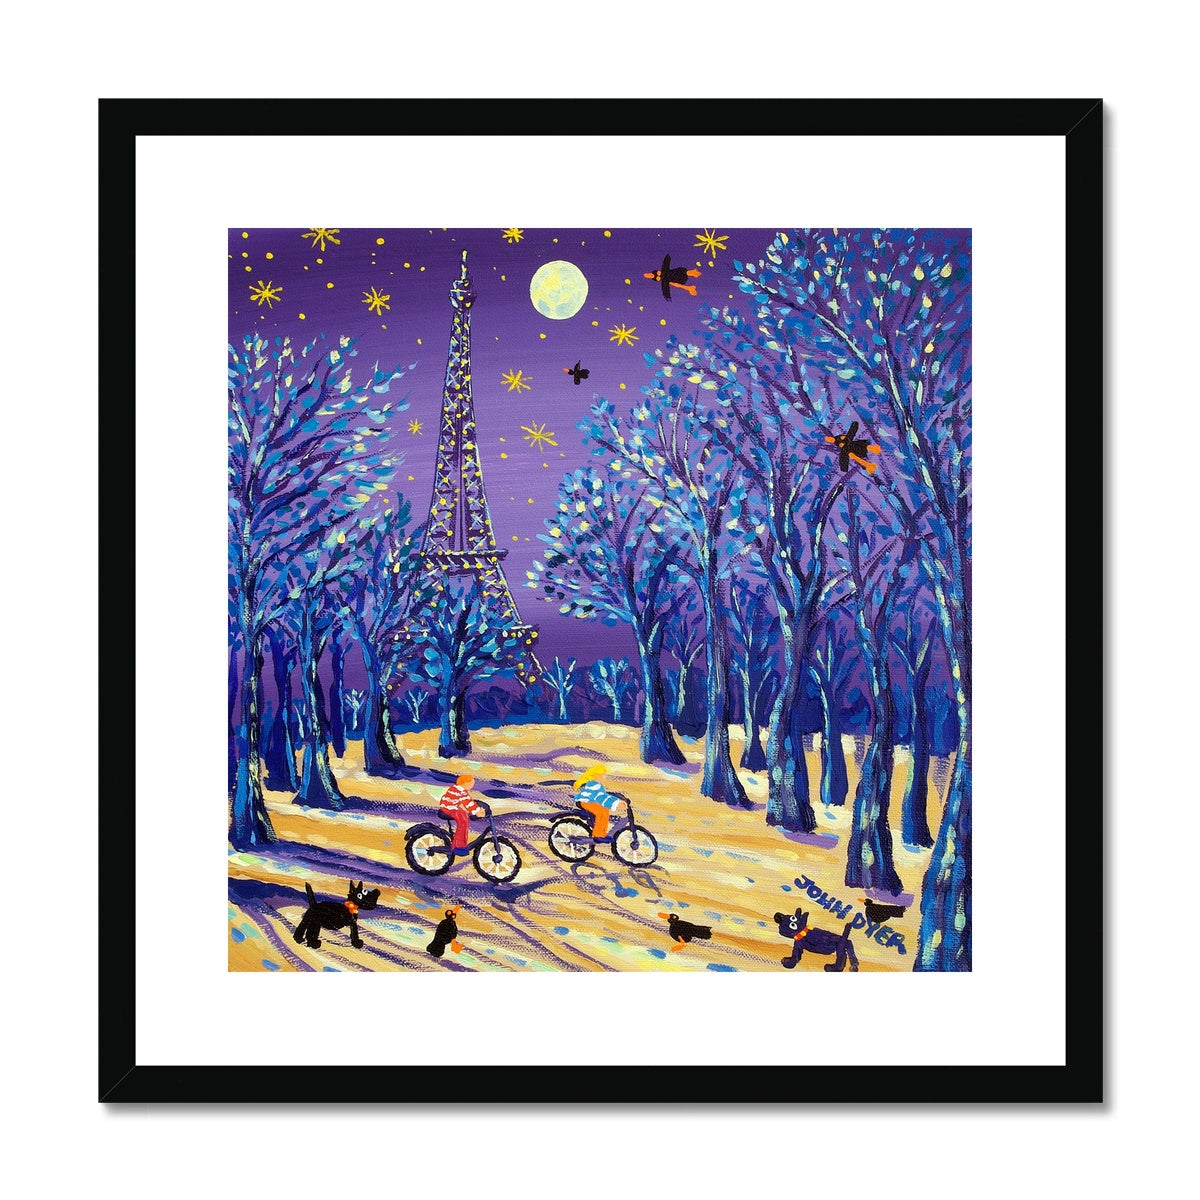 John Dyer Framed Open Edition French Art Print 'Cycling under the Moon, Eiffel Tower, Paris, France' French Art Gallery